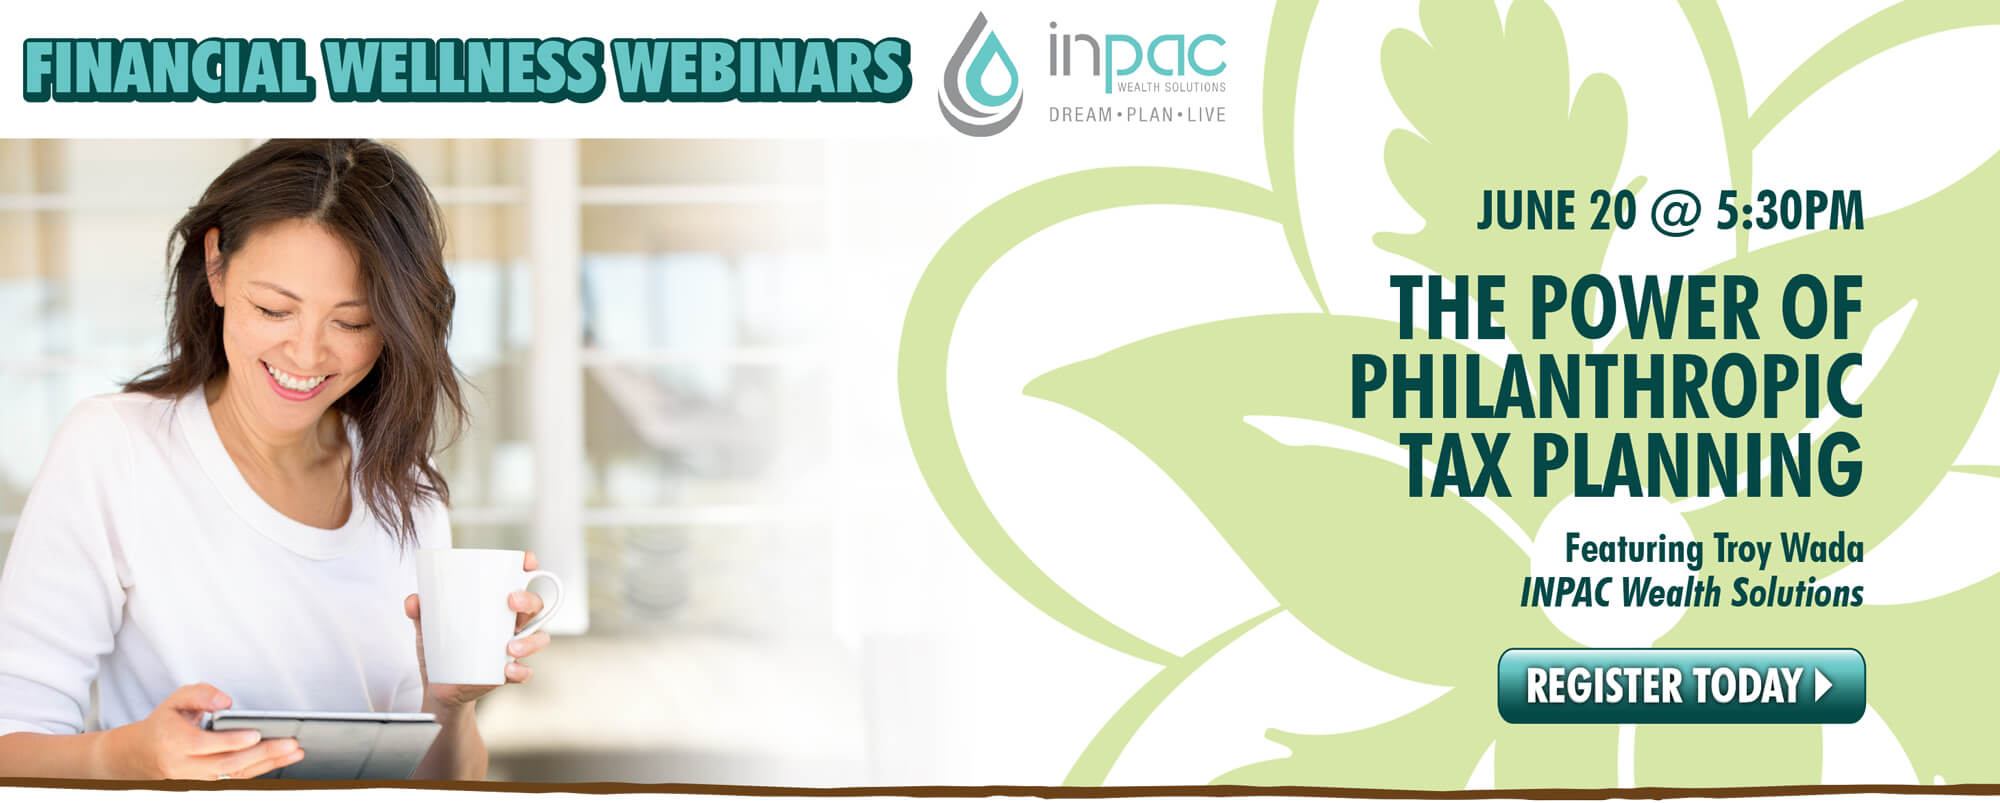 Join INPAC for their FREE webinar with Troy Wada.  RSVP today!